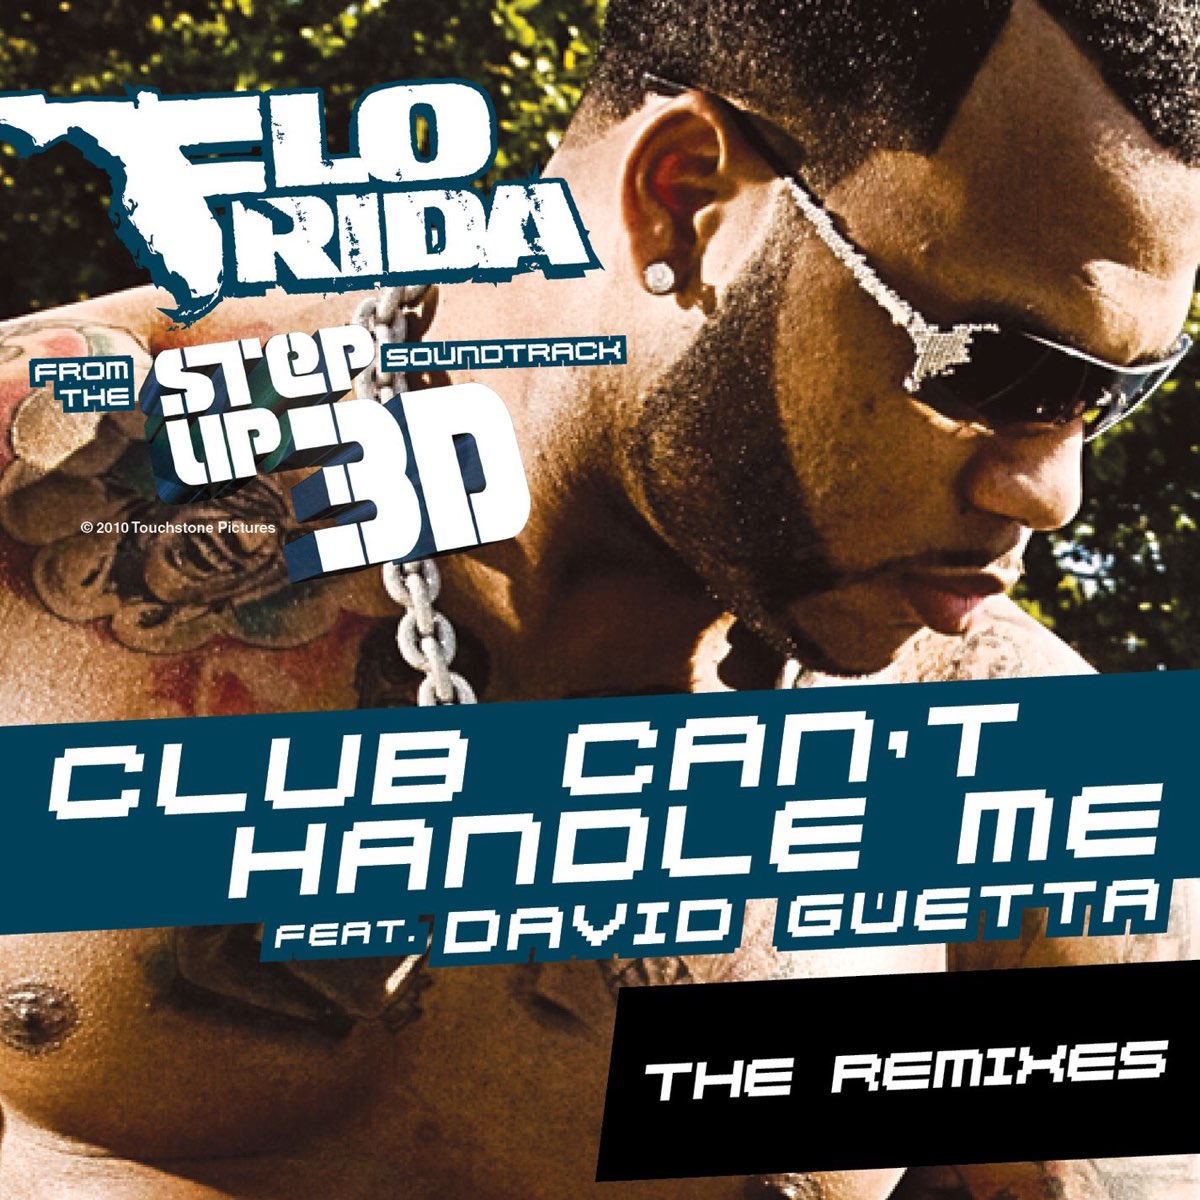 Club Can't Handle Me (feat. David Guetta) [From "Step Up 3D"] {The Remixes}  - EP by Flo Rida on Apple Music